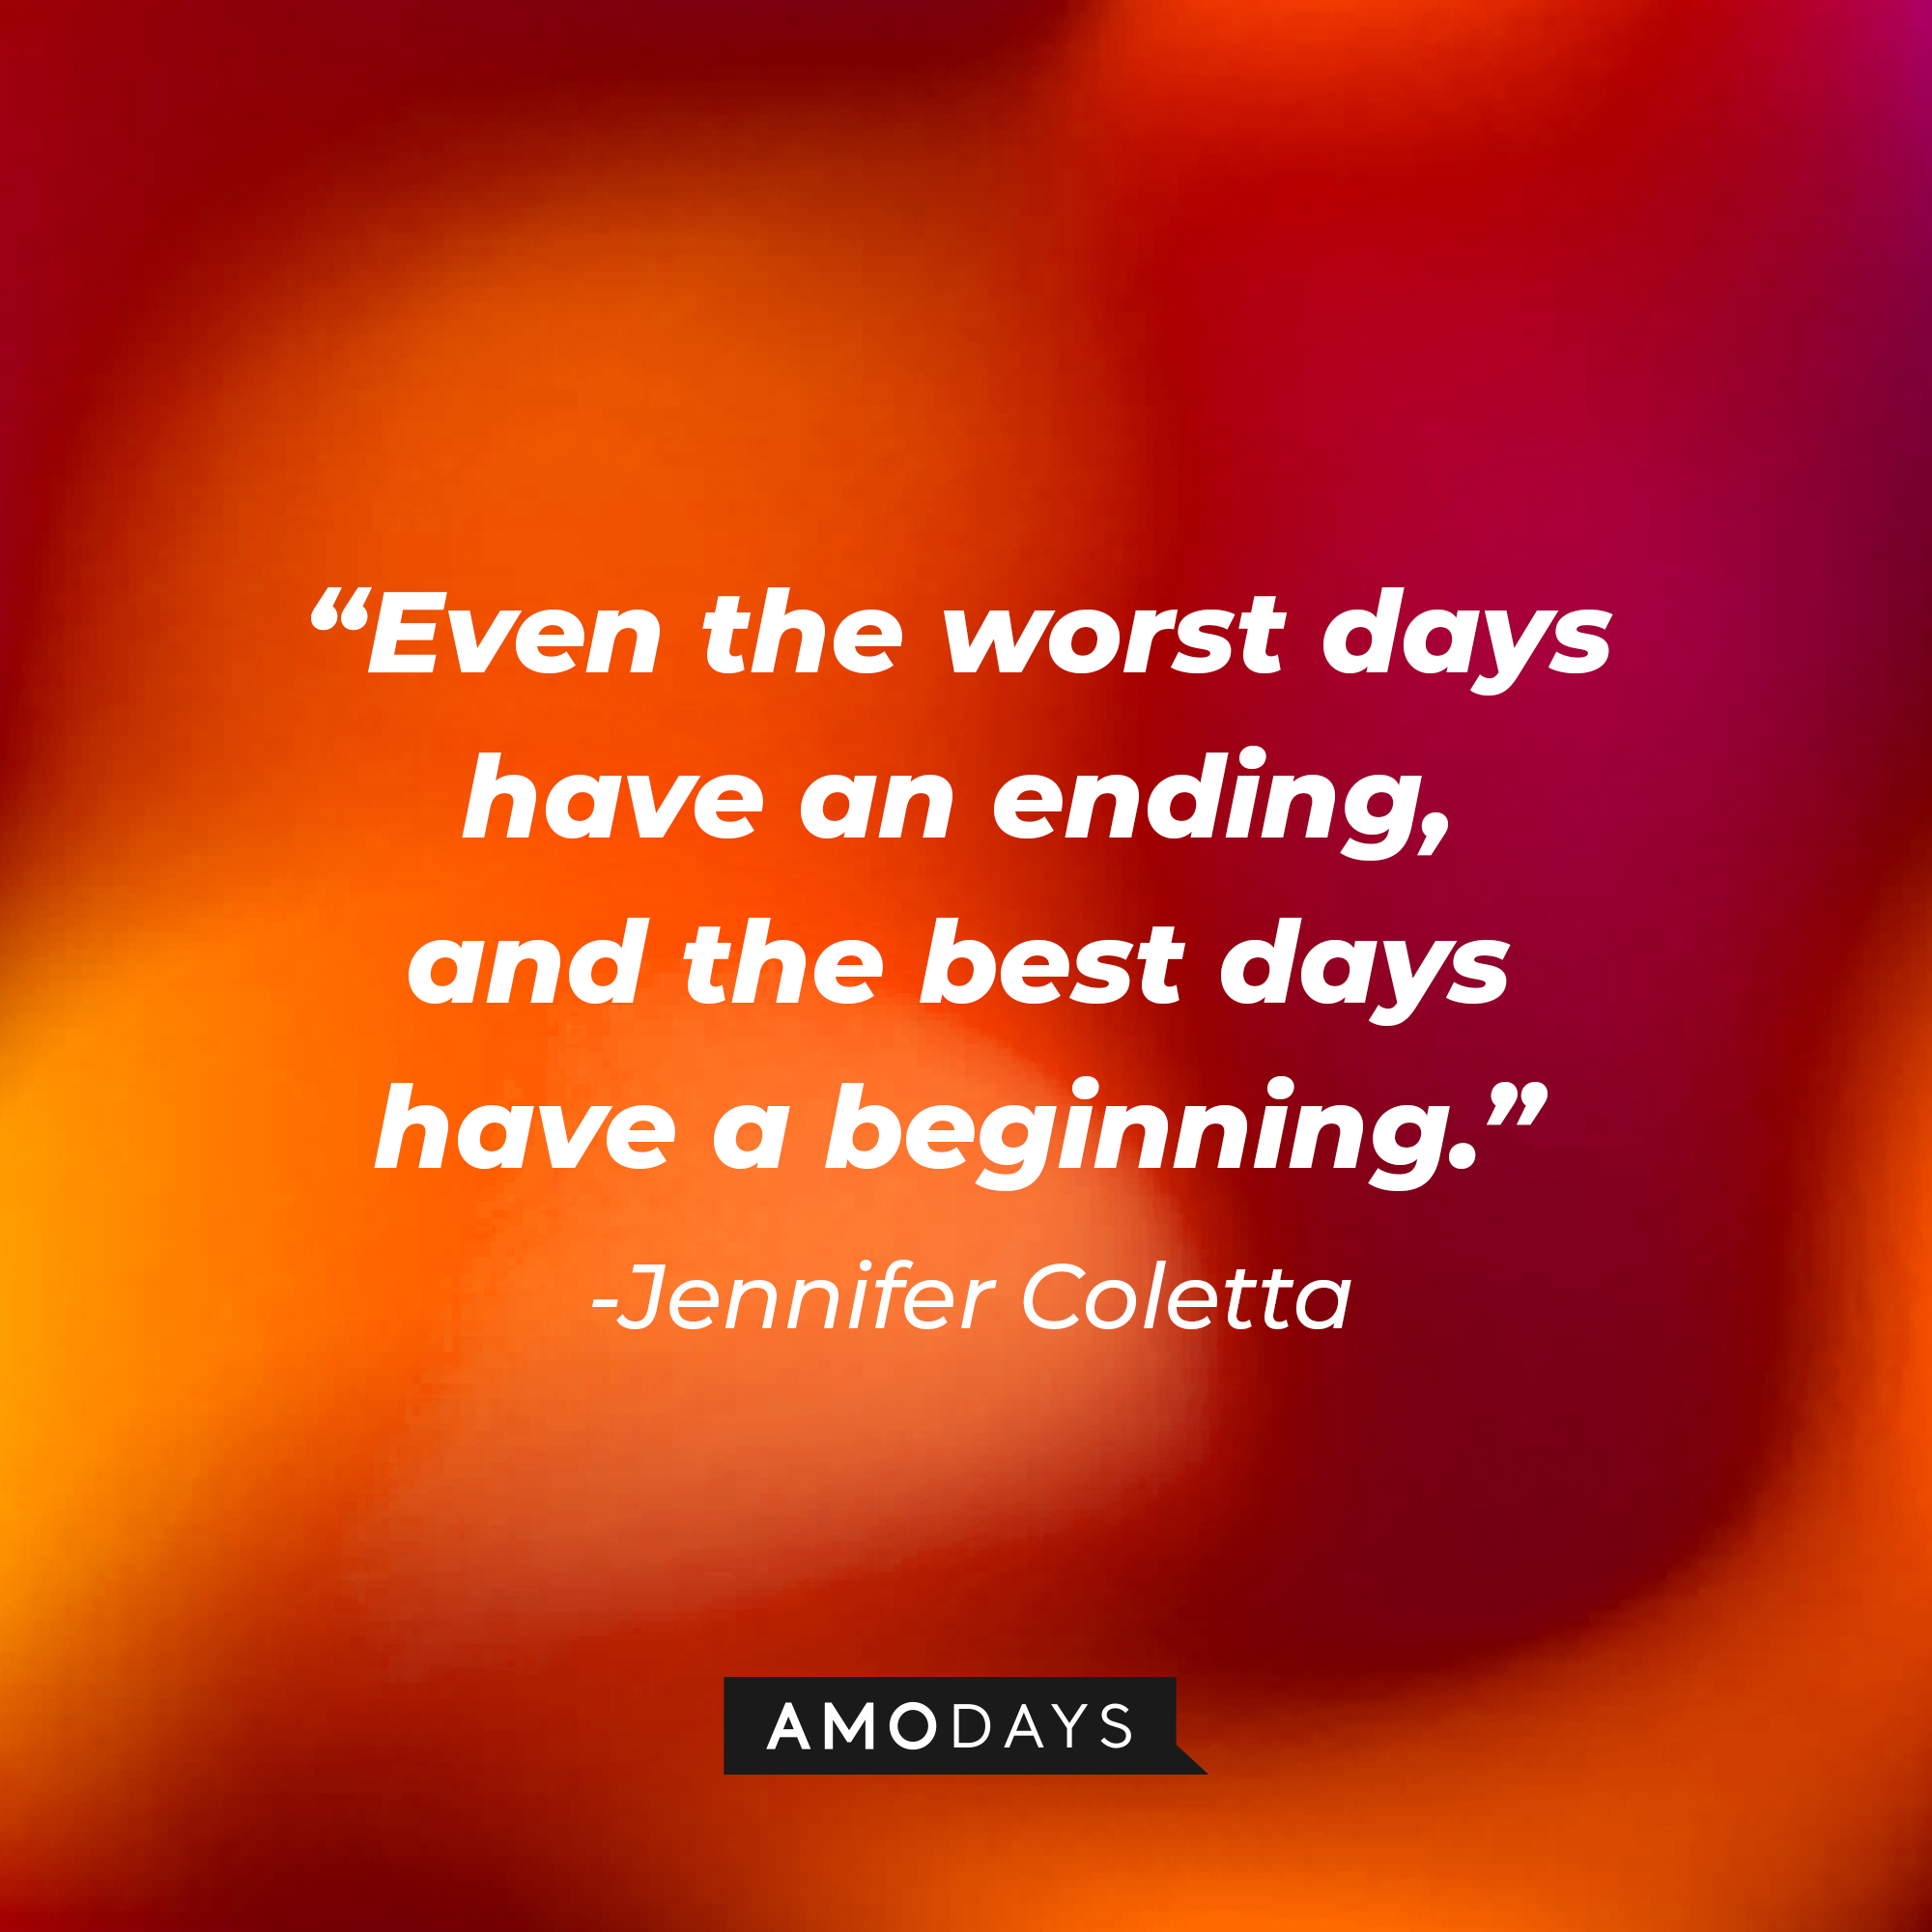 Jennifer Coletta’s quote: "Even the worst days have an ending, and the best days have a beginning."  | Image: Amodays